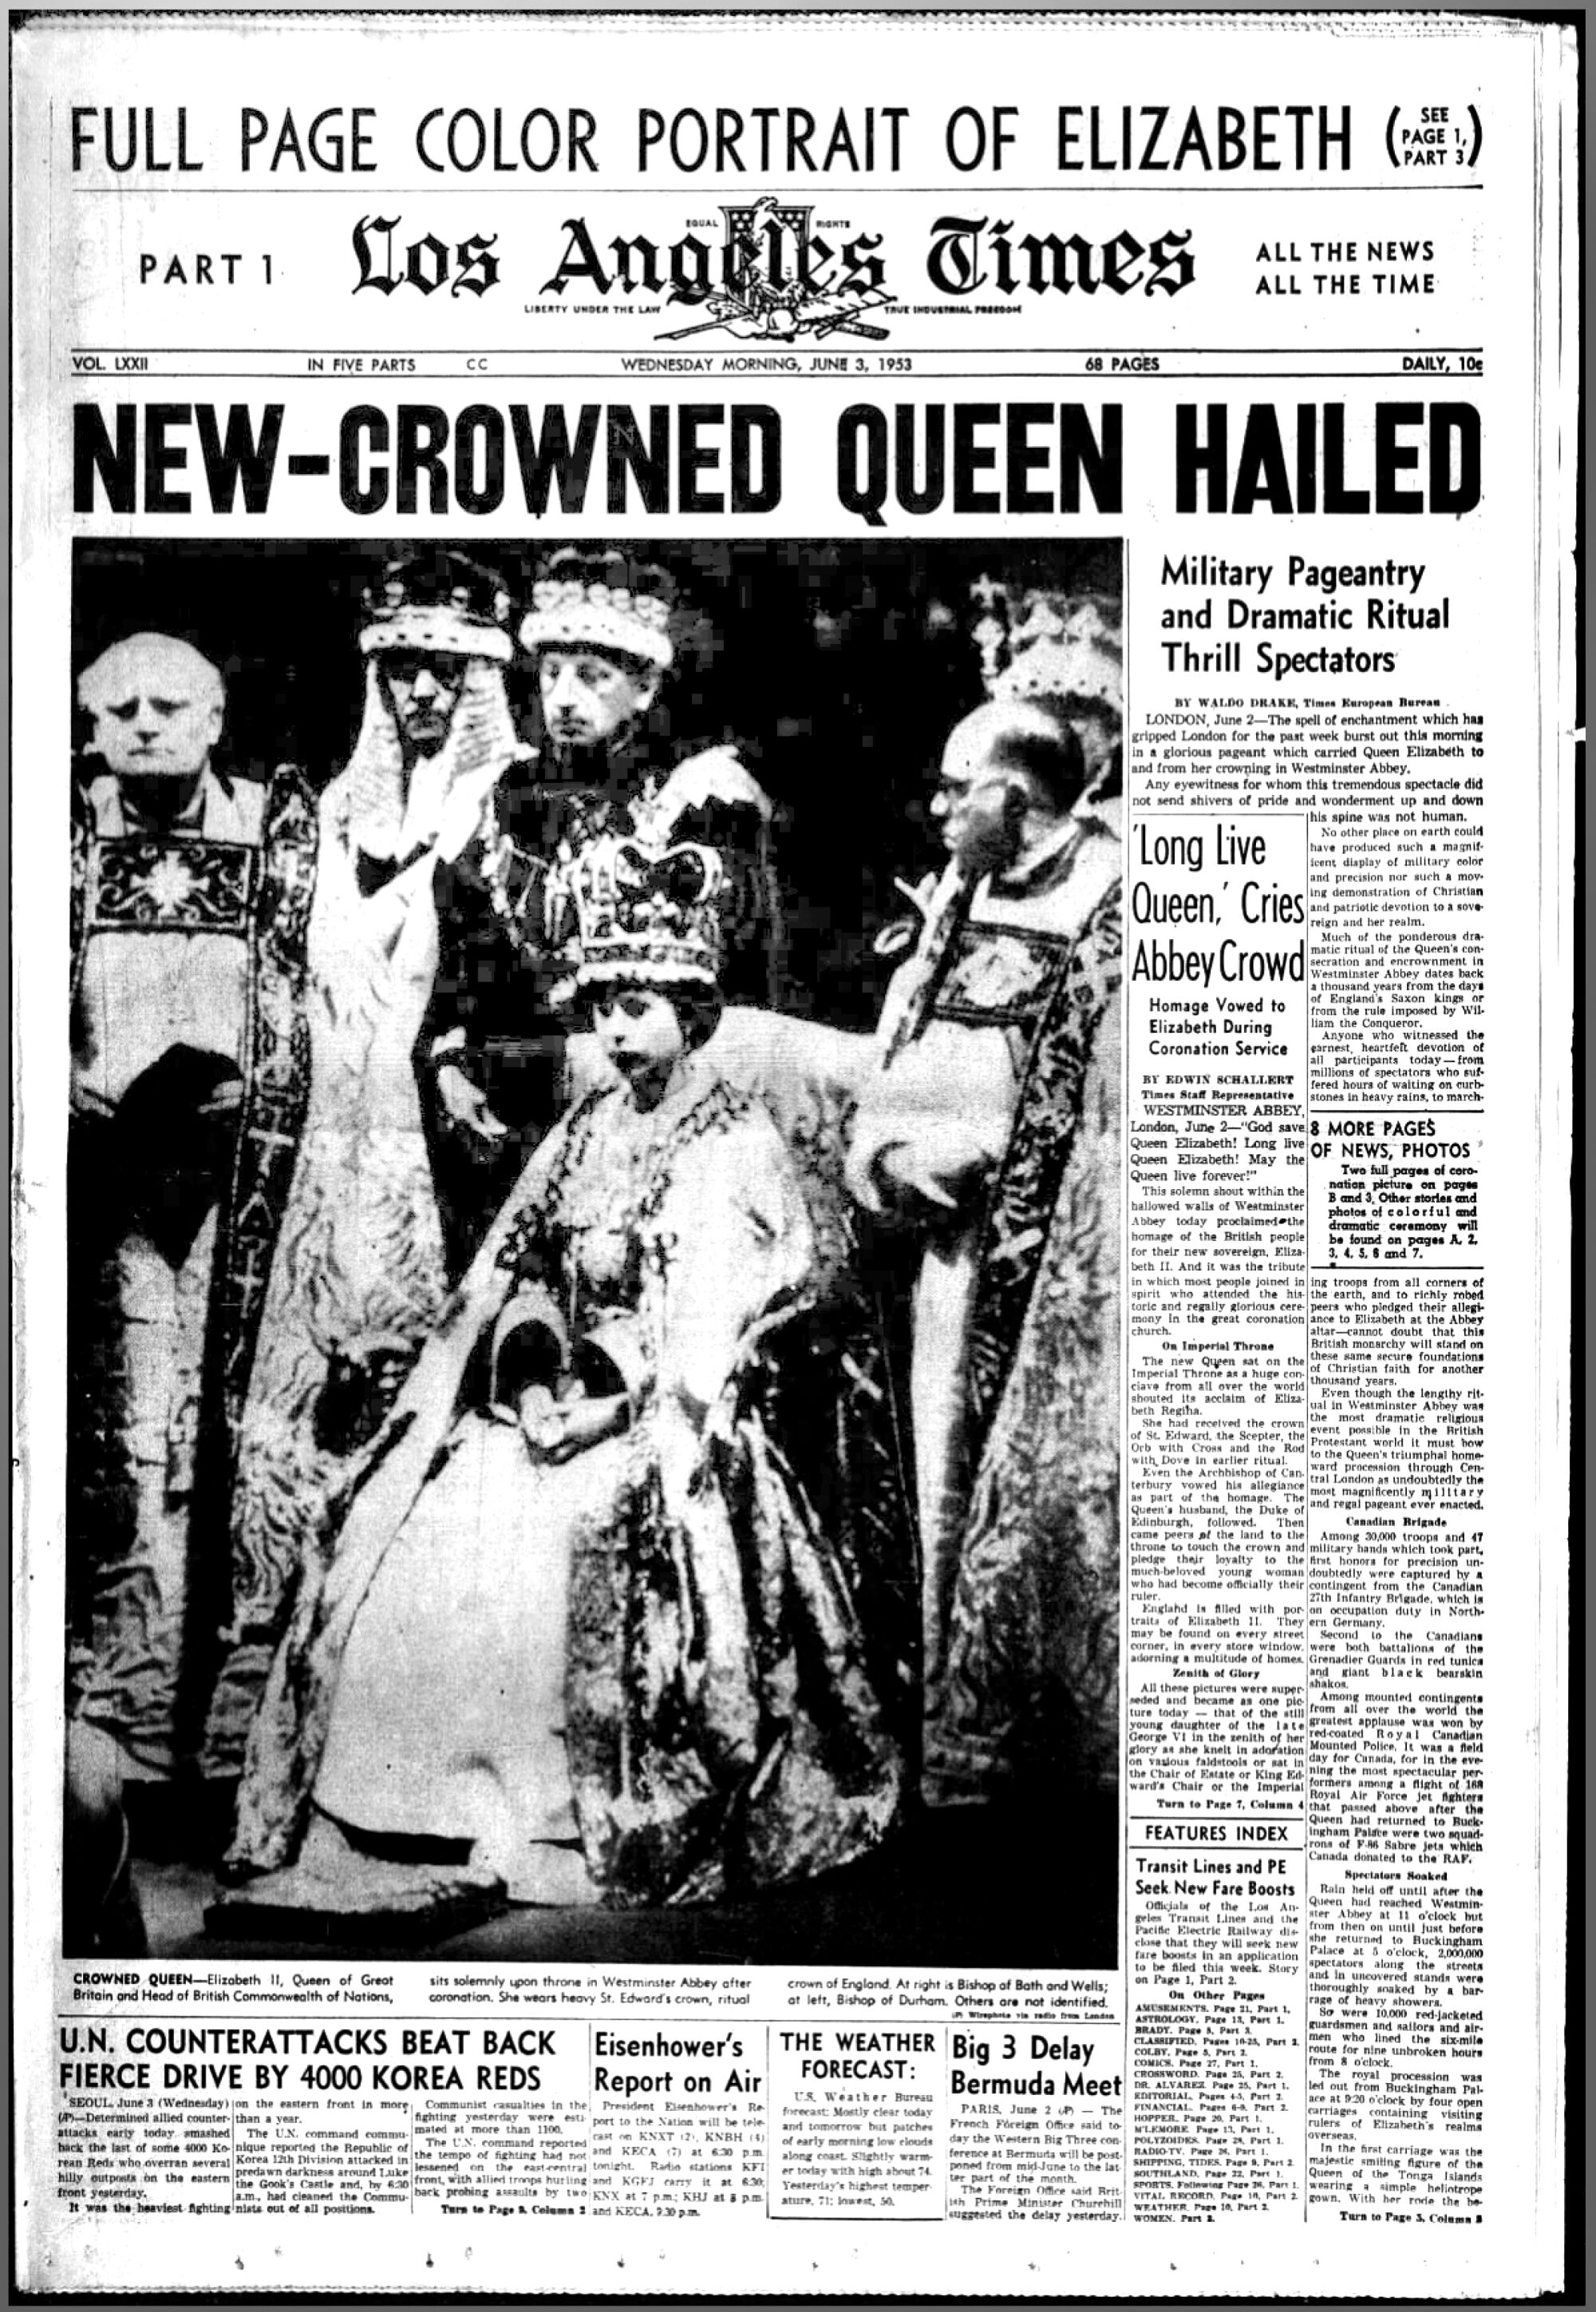 The Los Angeles Times' front-page headline reads, New-Crowned Queen Hailed, above a photo of a seated woman wearing a crown